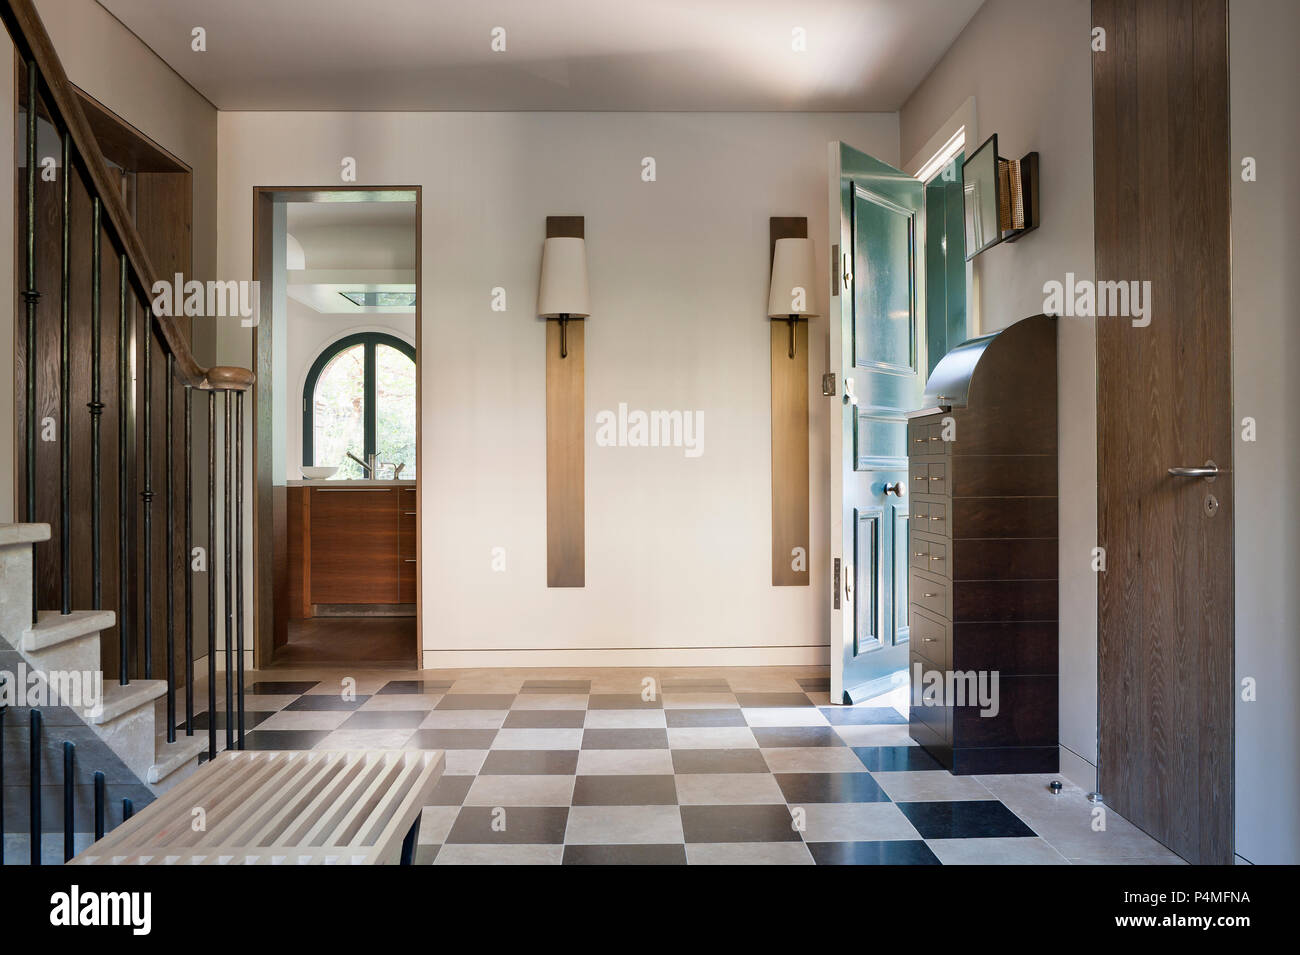 Entrance hall with tiled floor Stock Photo